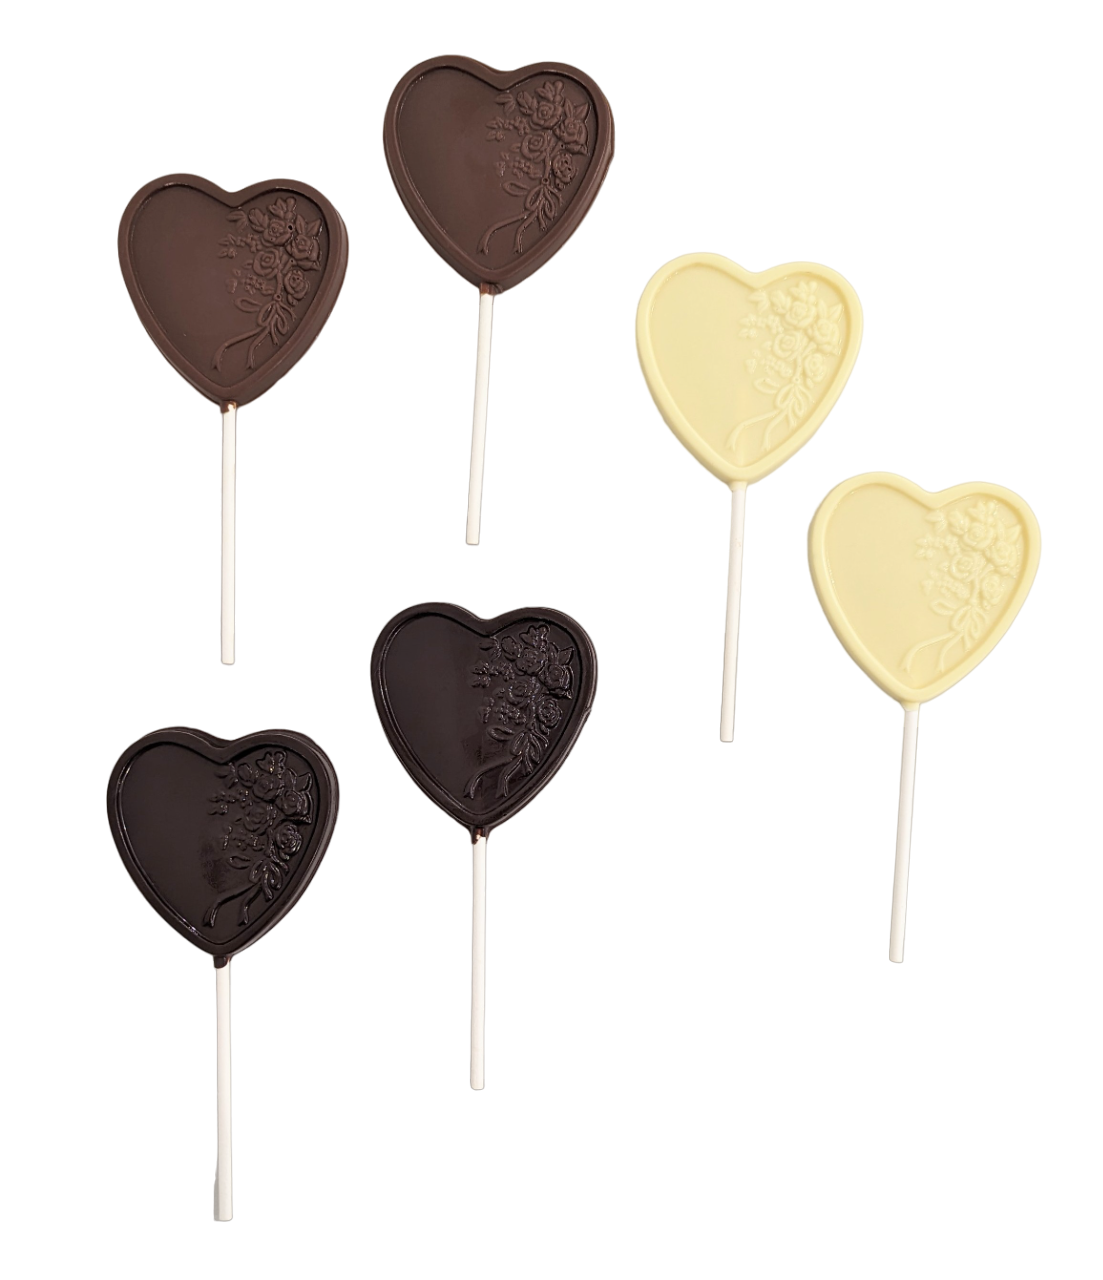 Sweet on Vermont Artisan Confections - Valentine's Day Heart Lollipops